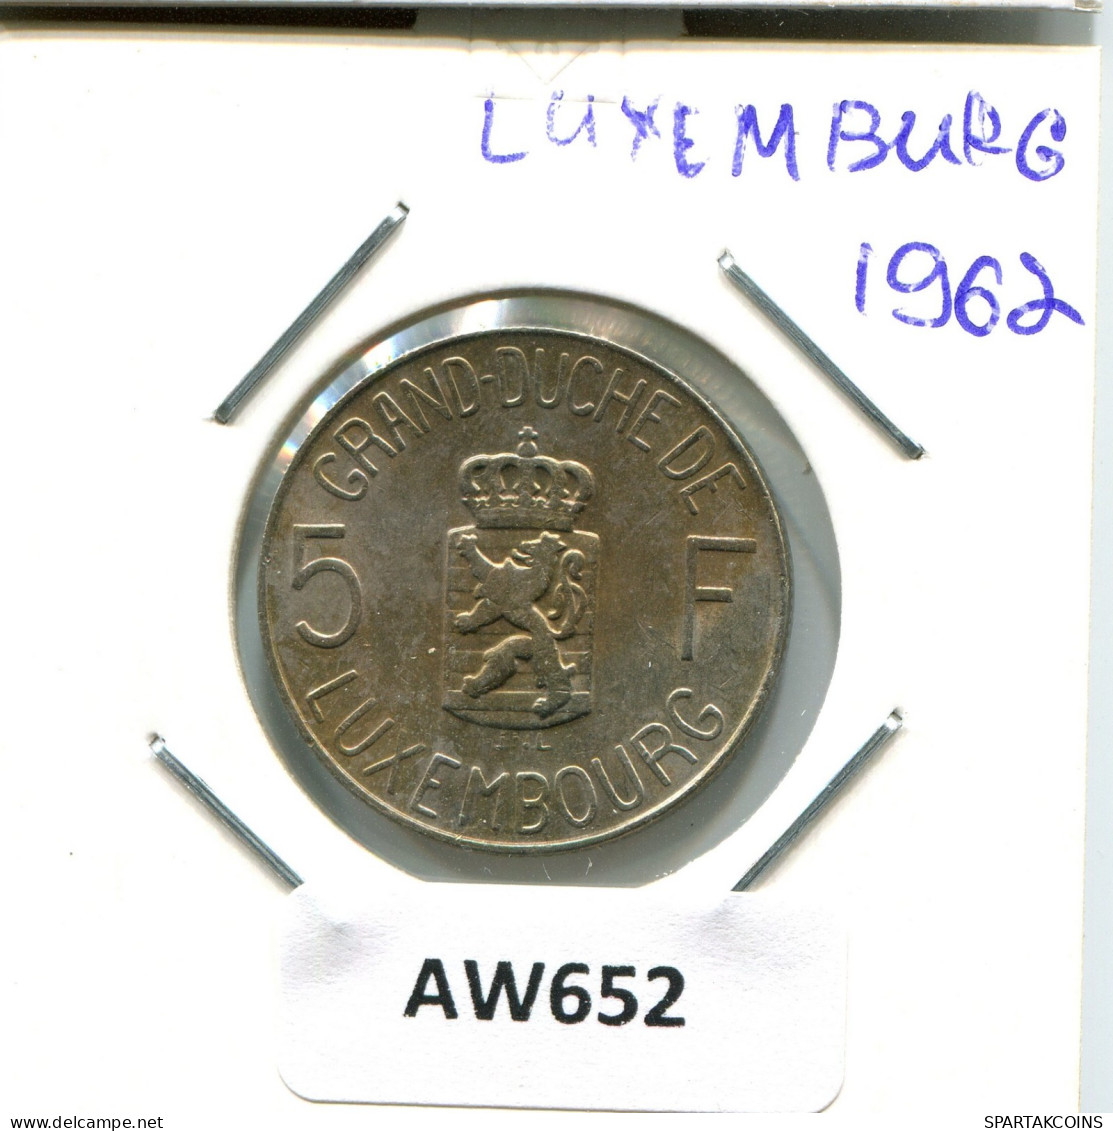 5 CENTIMES 1962 LUXEMBURGO LUXEMBOURG Moneda #AW652.E.A - Luxembourg